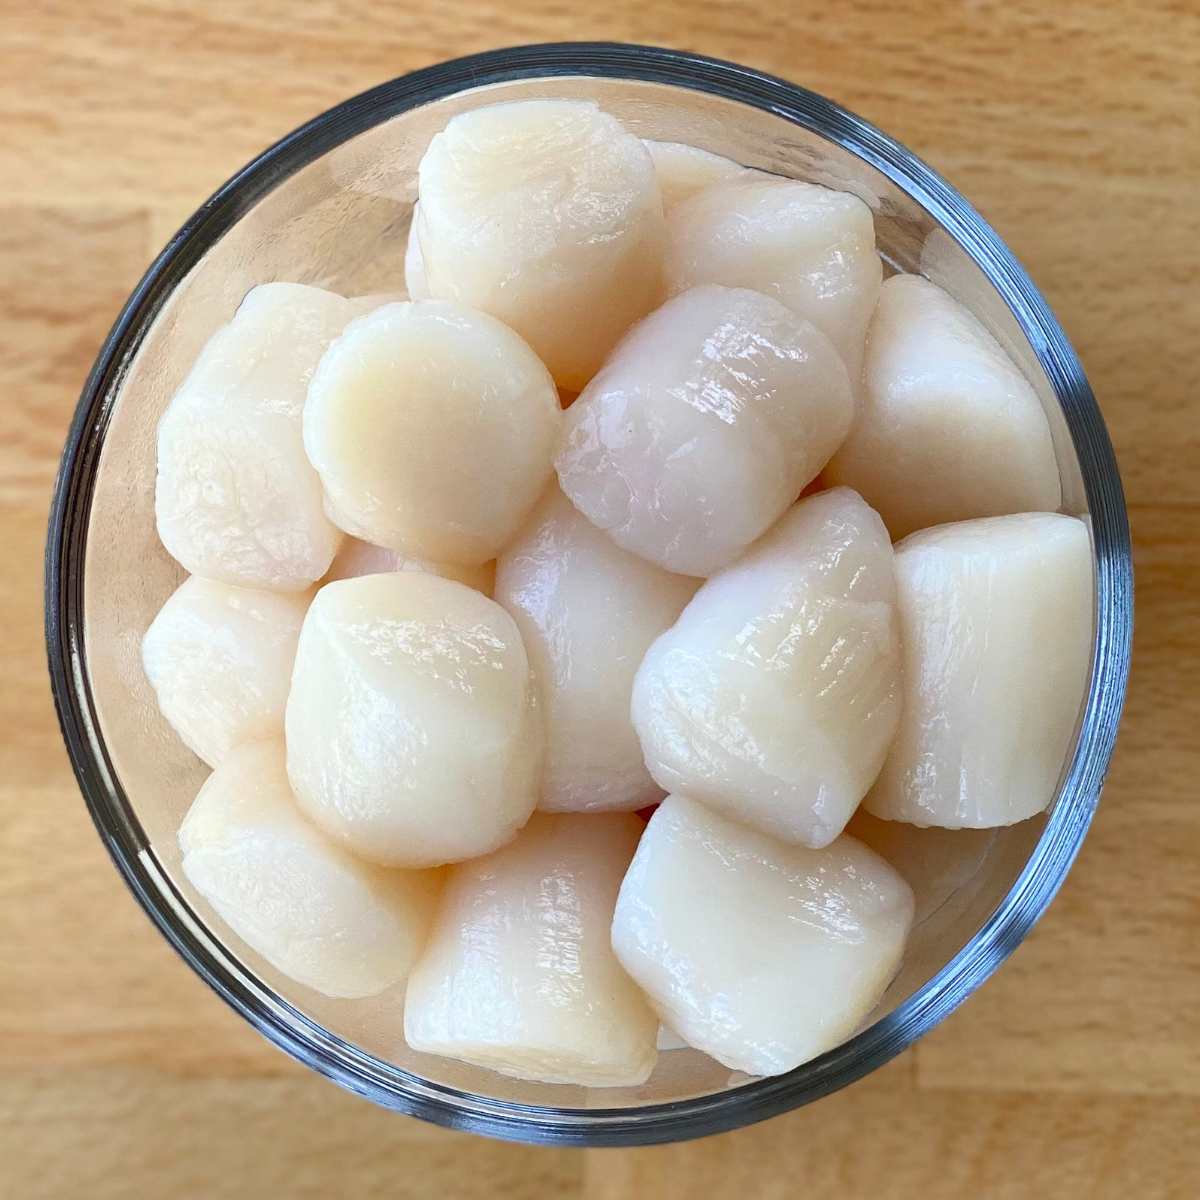 Glass bowl with large uncooked sea scallops in it.